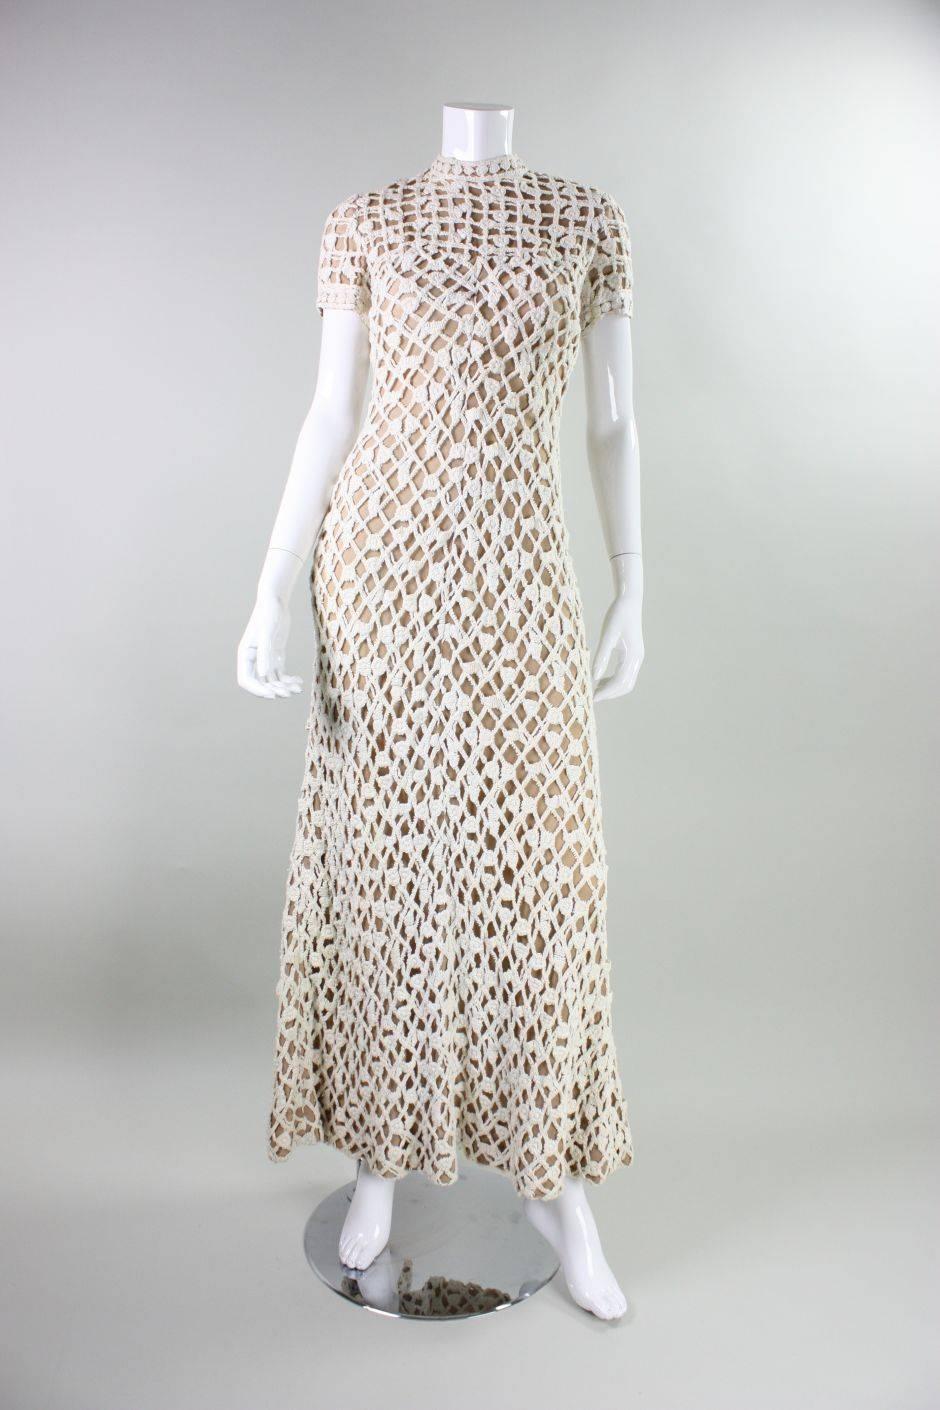 Vintage gown from Werle of Beverly Hills dates to the 1970's and is made of cream-colored crochet that is sewn onto nude netting.  It features a mock neck, short sleeves, and a center back zipper.  Detached shawl measures 20